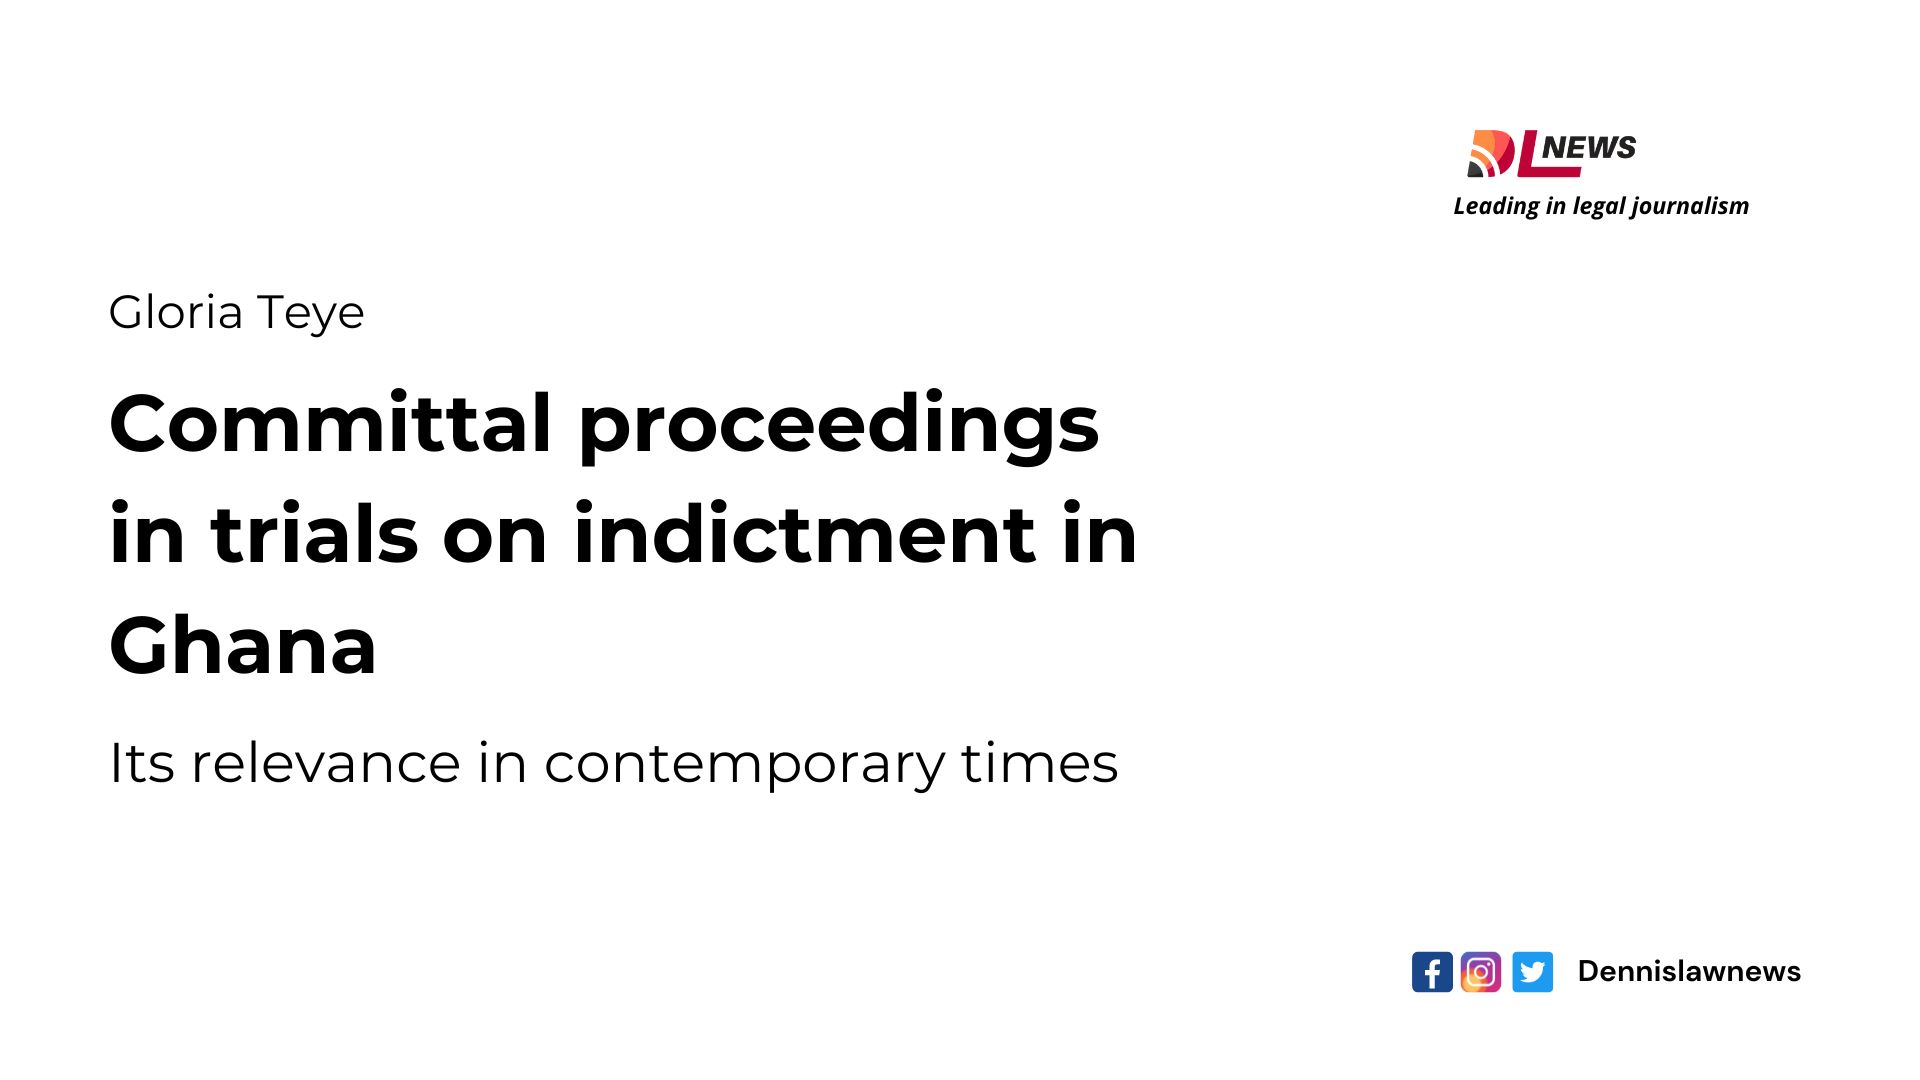 Committal proceedings in trials on indictment in Ghana: Its relevance in contemporary times